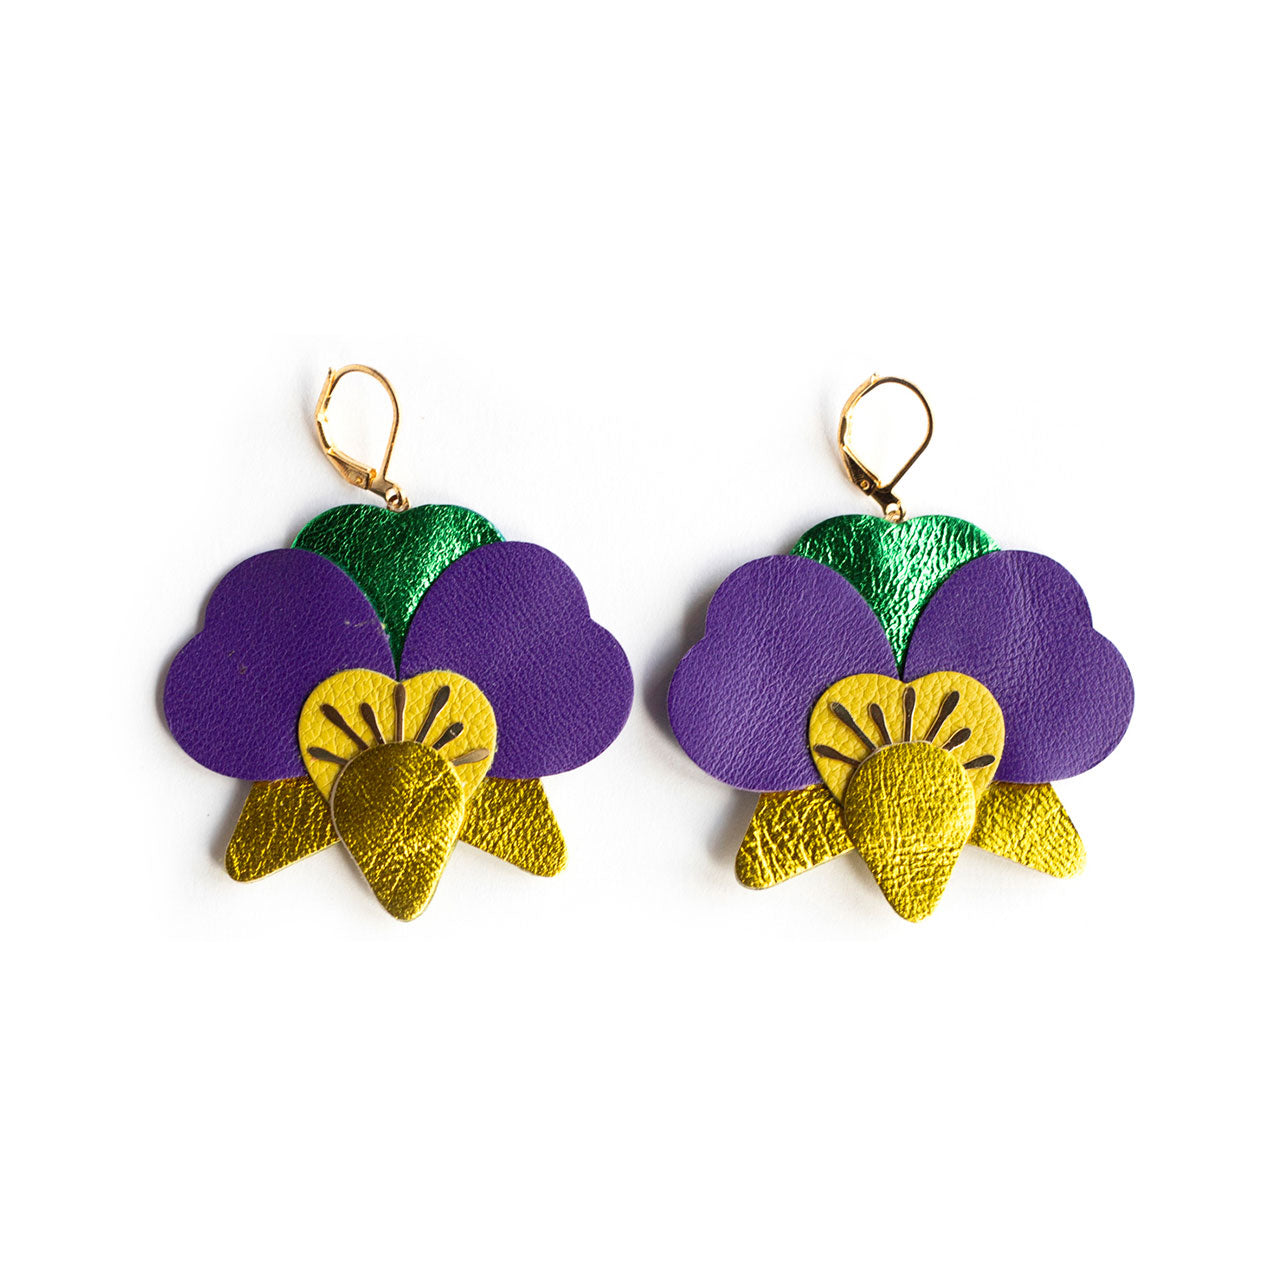 Orchid earrings - yellow, chartreuse, purple, green